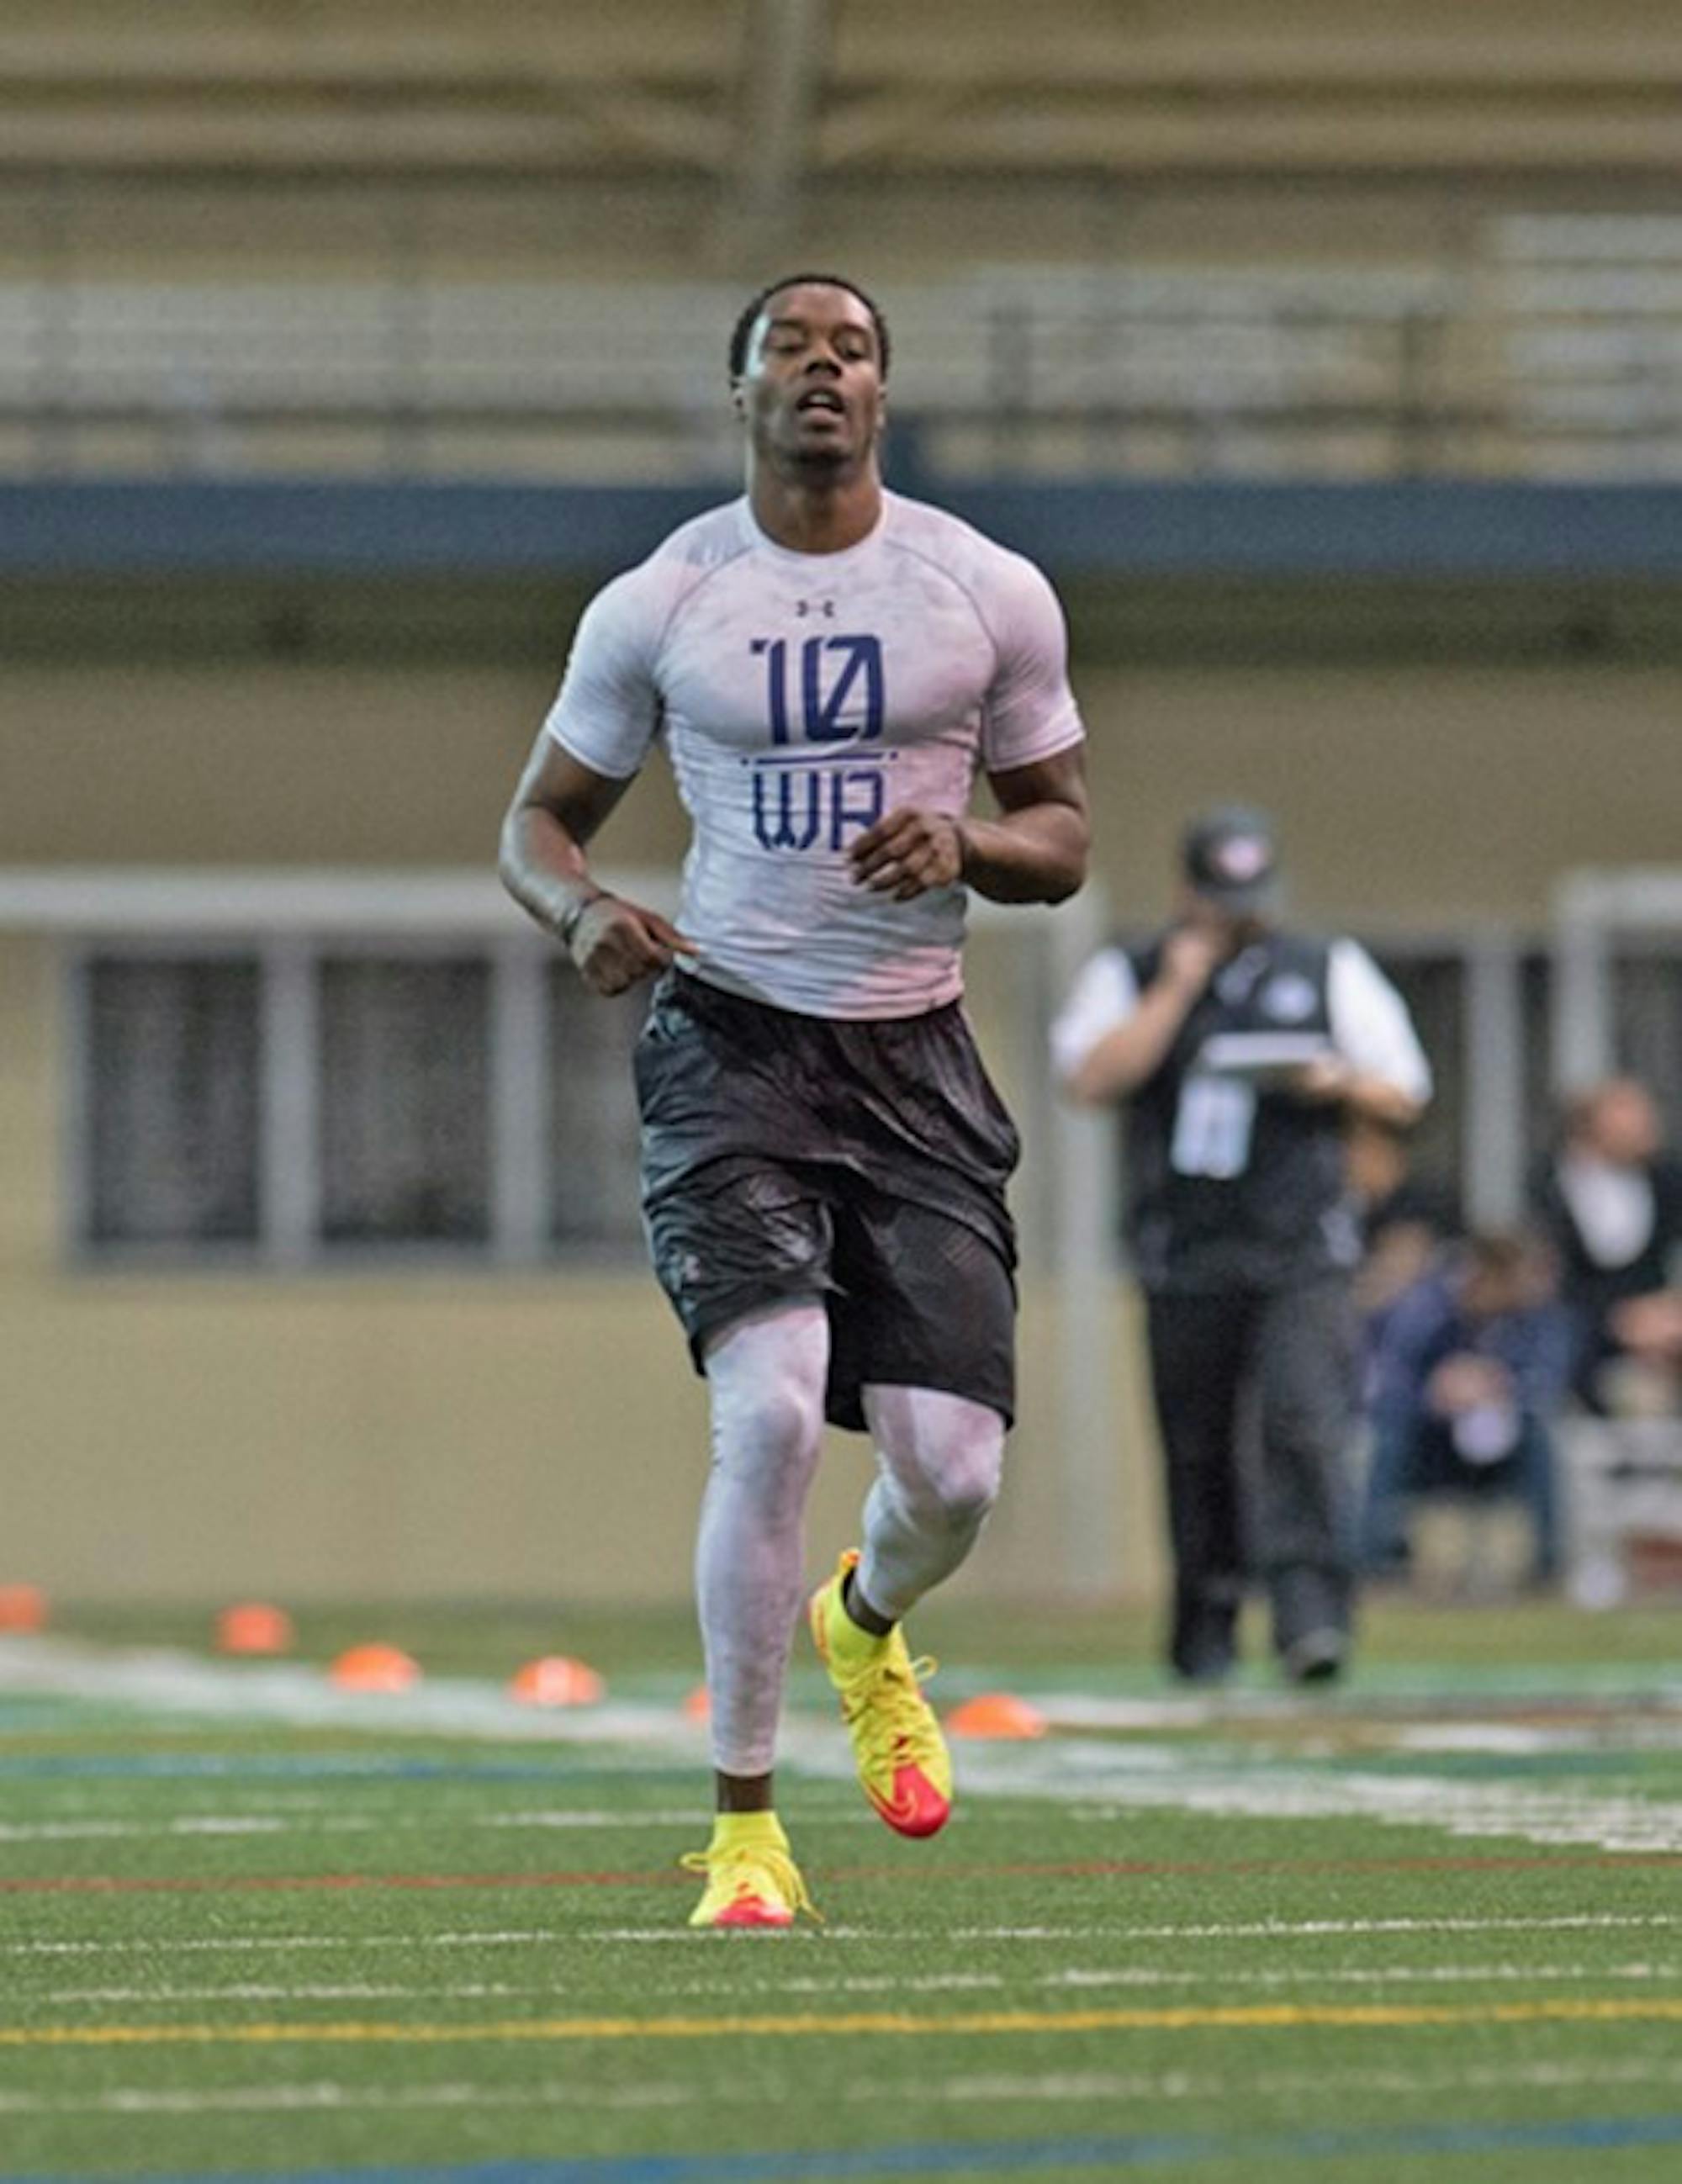 Former Irish wide receiver DaVaris Daniels slows up after a 40-yard dash attempt during Notre Dame's Pro Day at Loftus Sports Center yesterday.